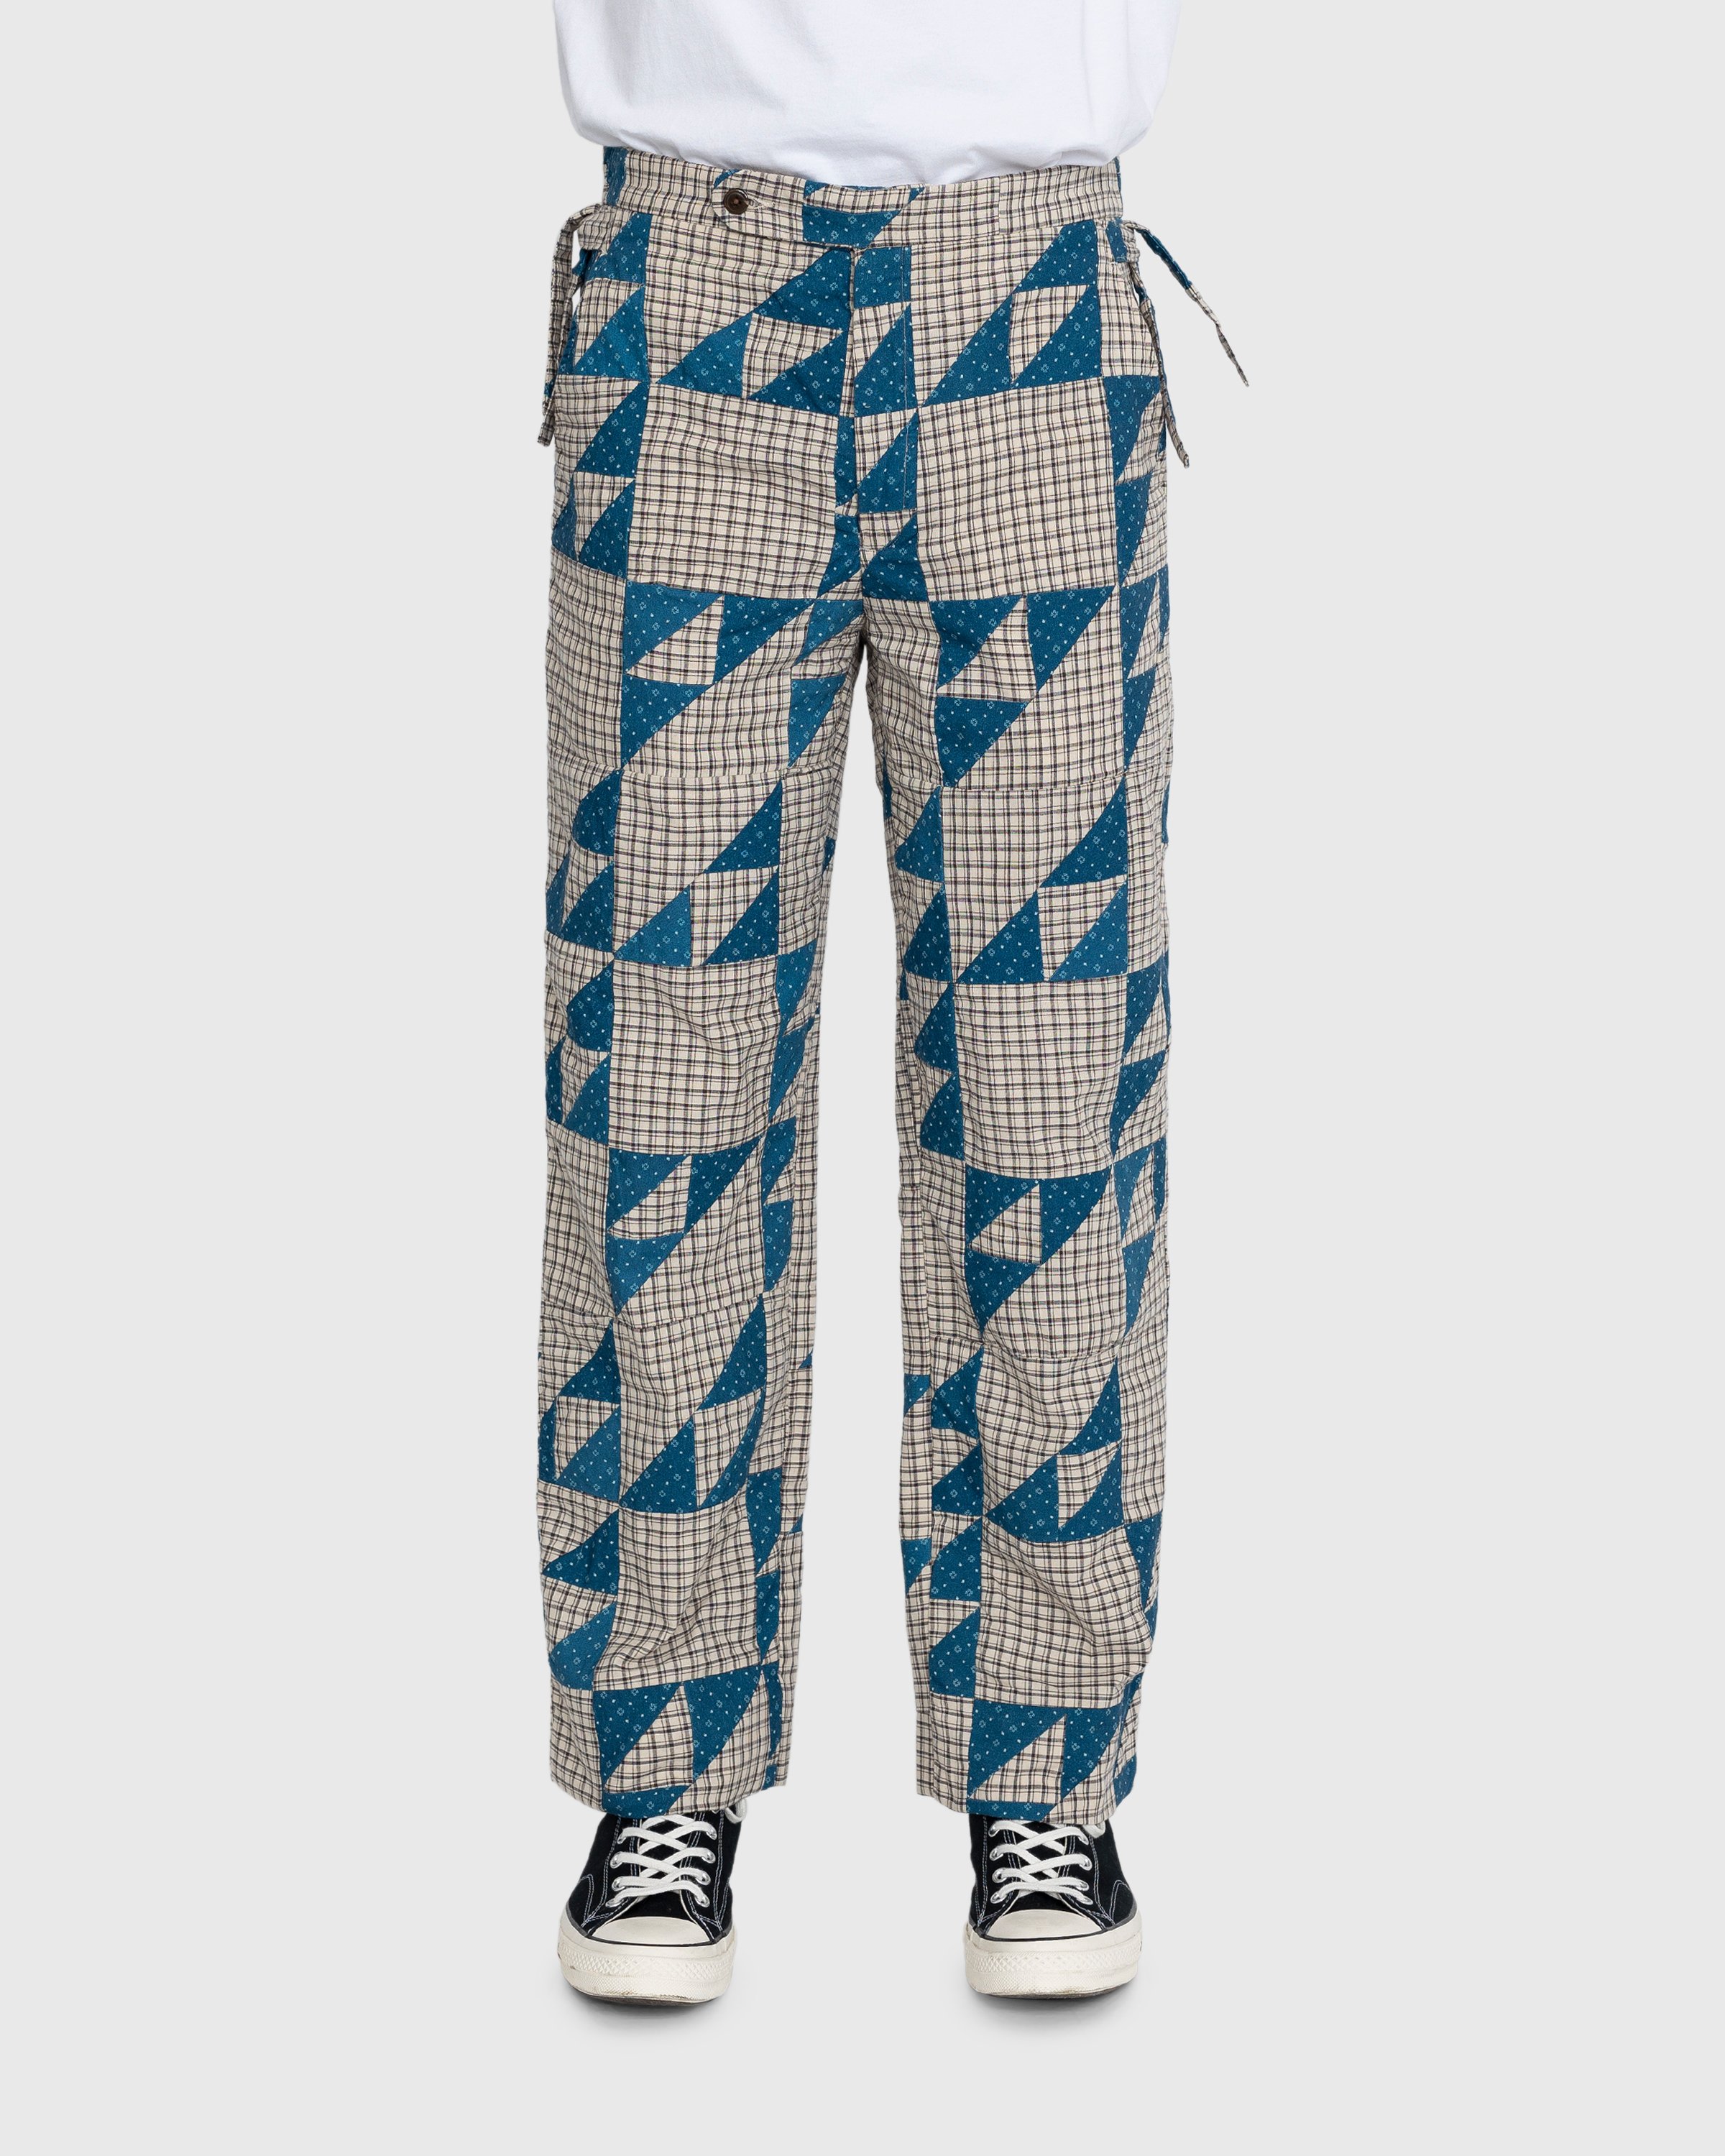 Bode - Wandering Lover Trousers Multi - Clothing - Multi - Image 4